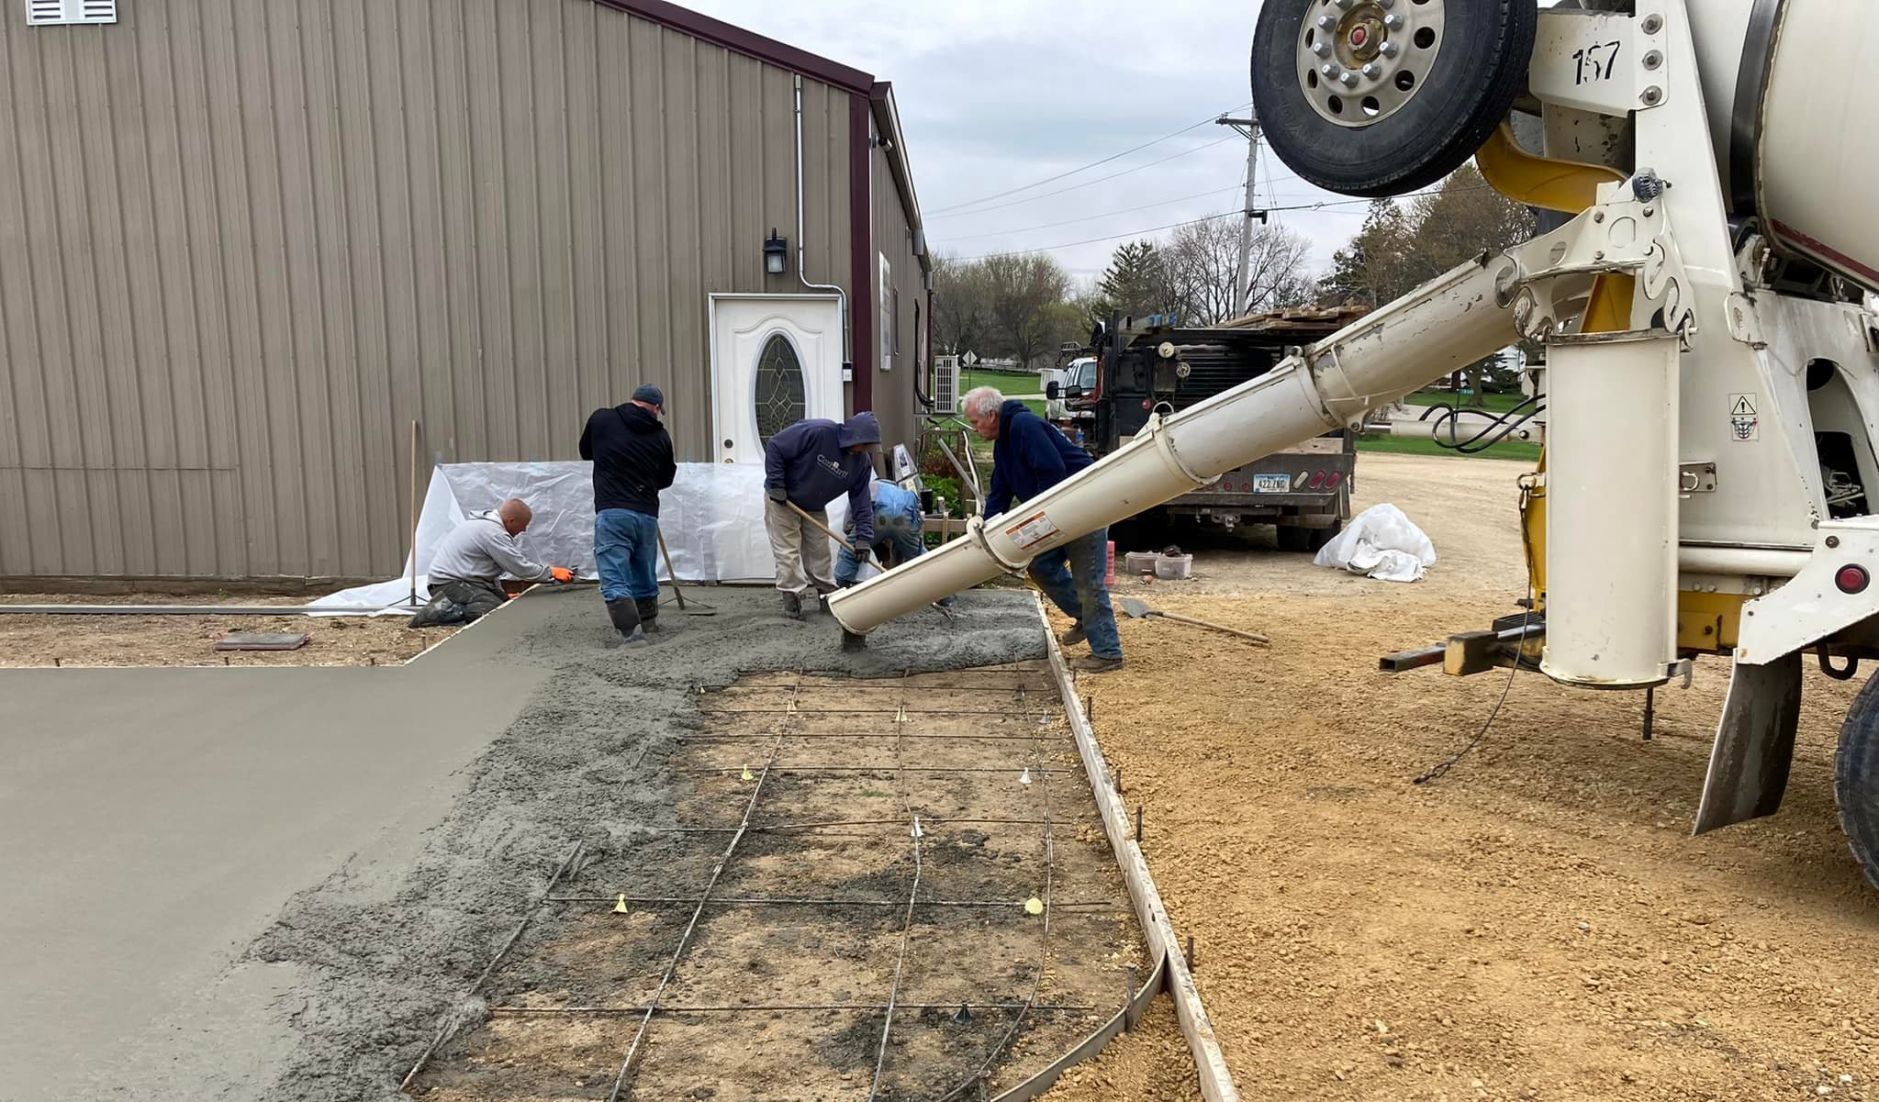 Construction takes place on a new outdoor patio at Iowa Grape Vines Winery.    PHOTO CREDIT: Photo by: Iowa Grape Vines Winery